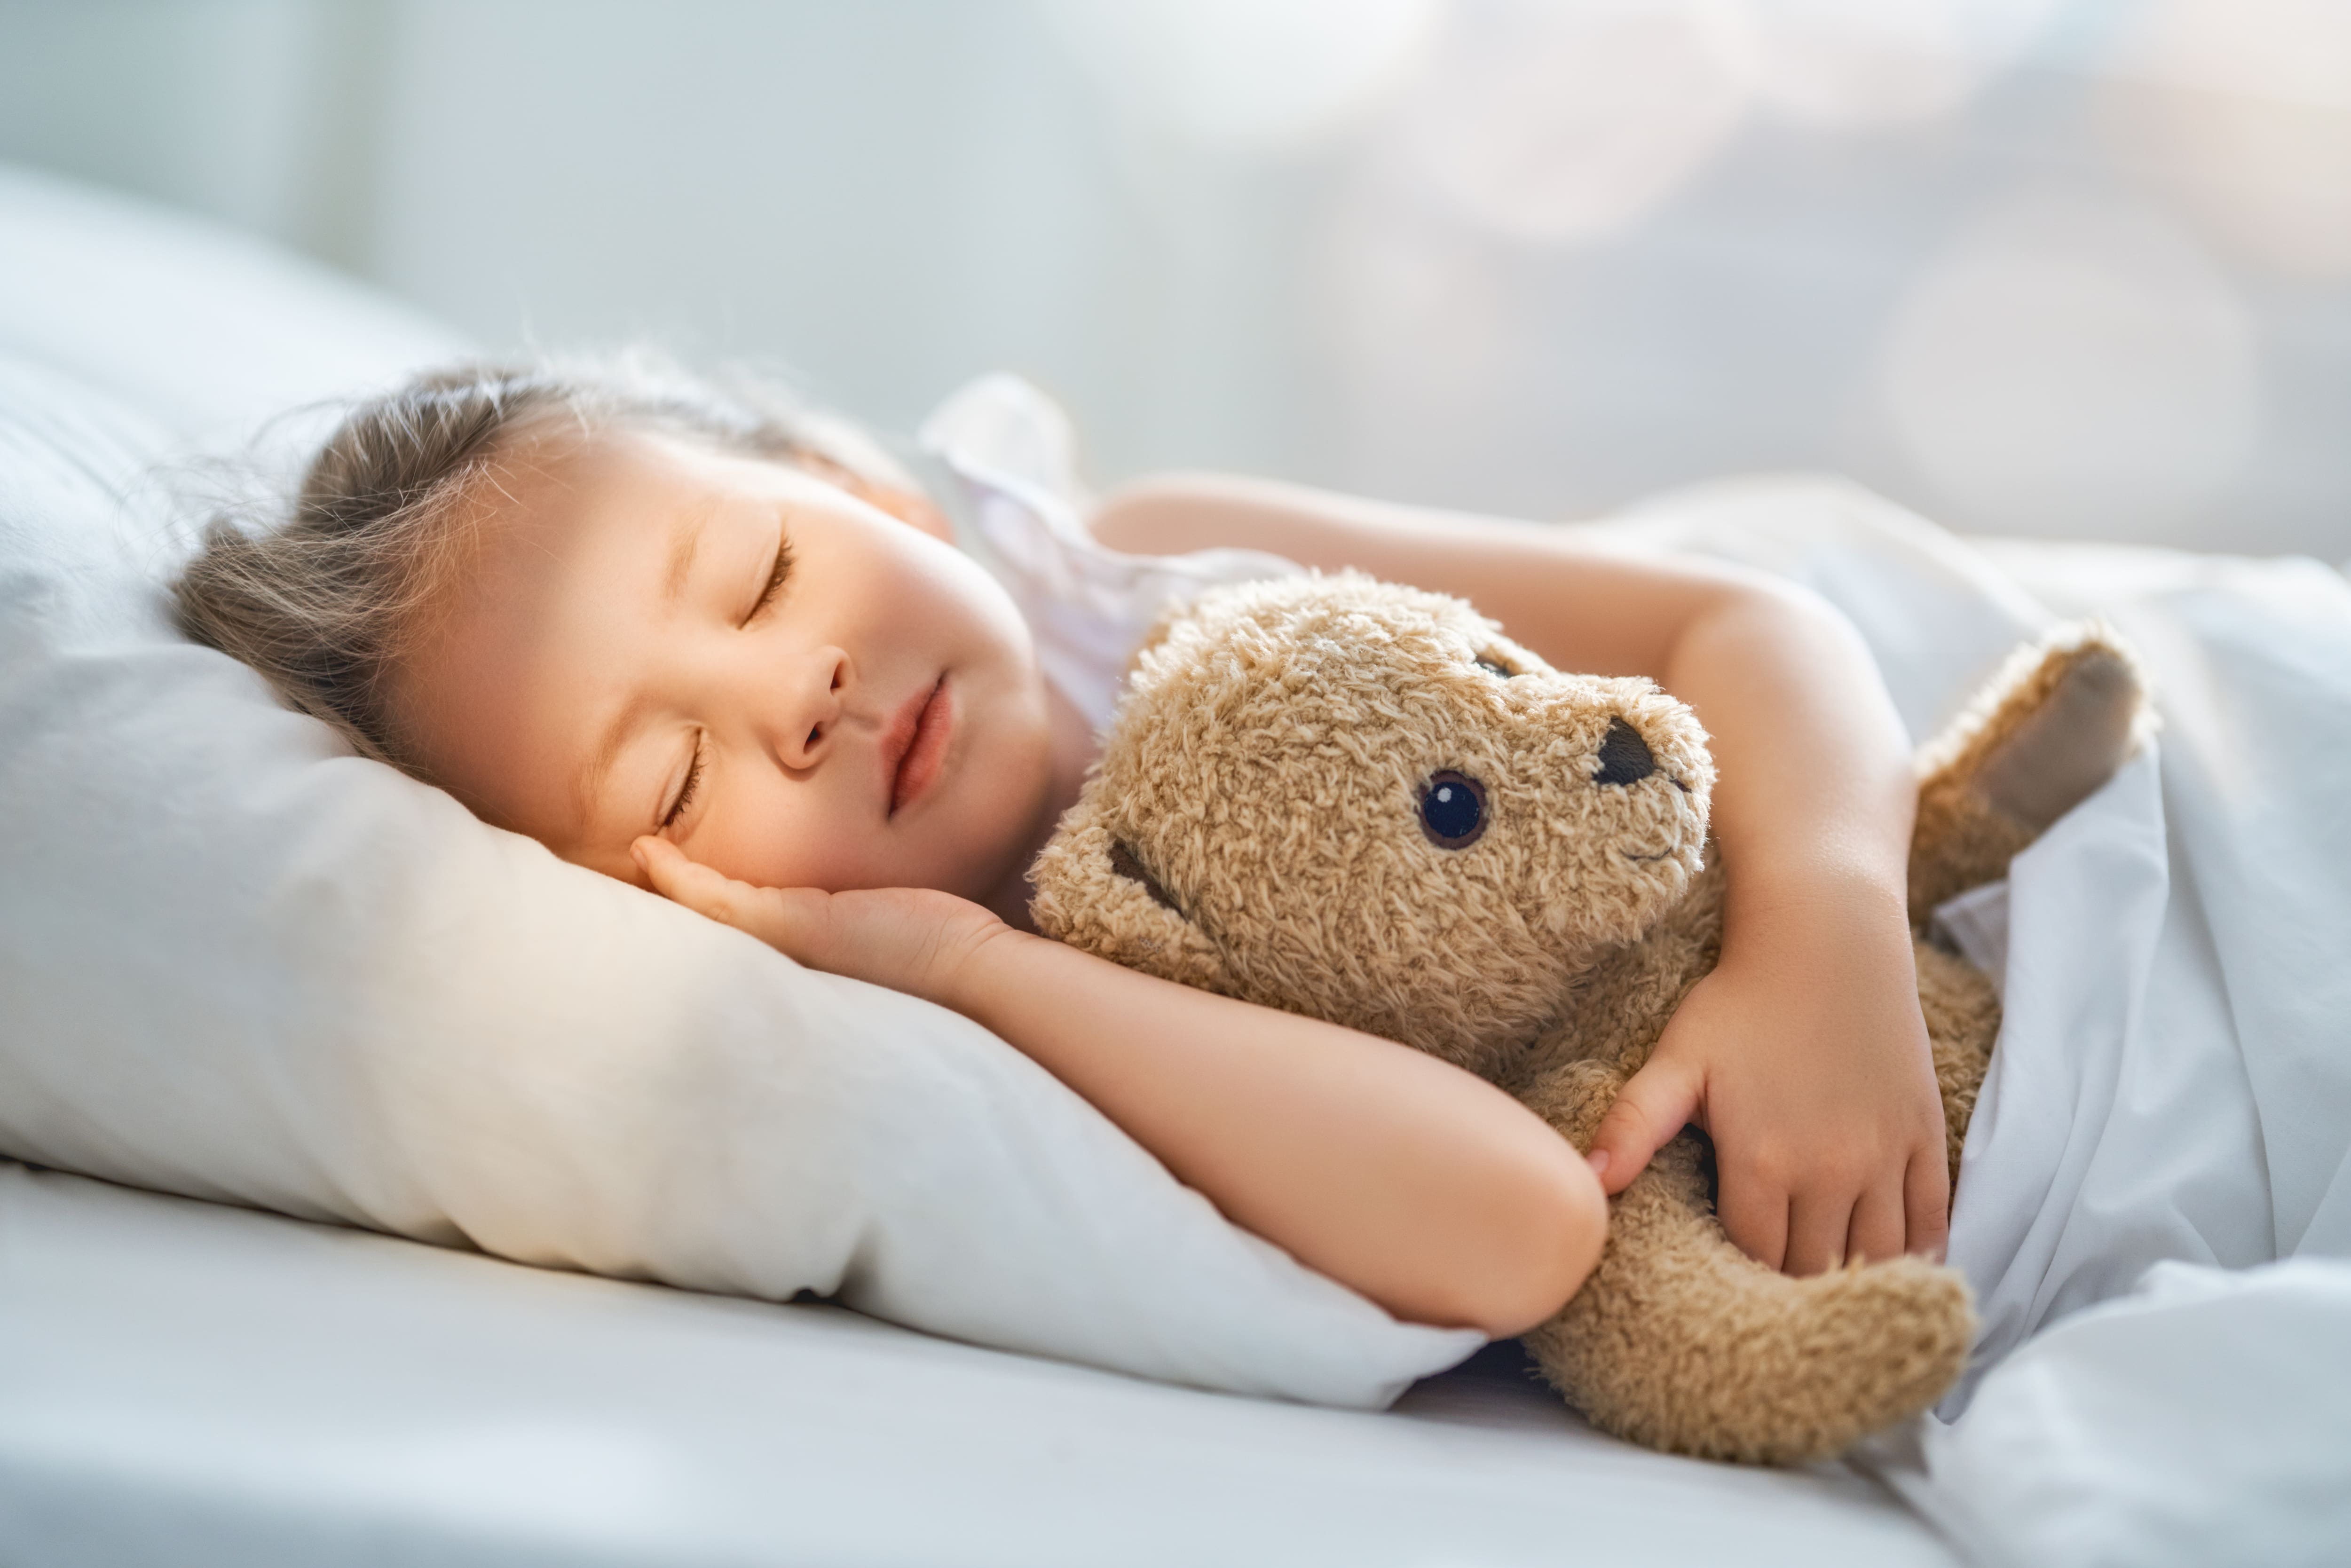 A child girl is sleeping in the bed holding a teddy bear